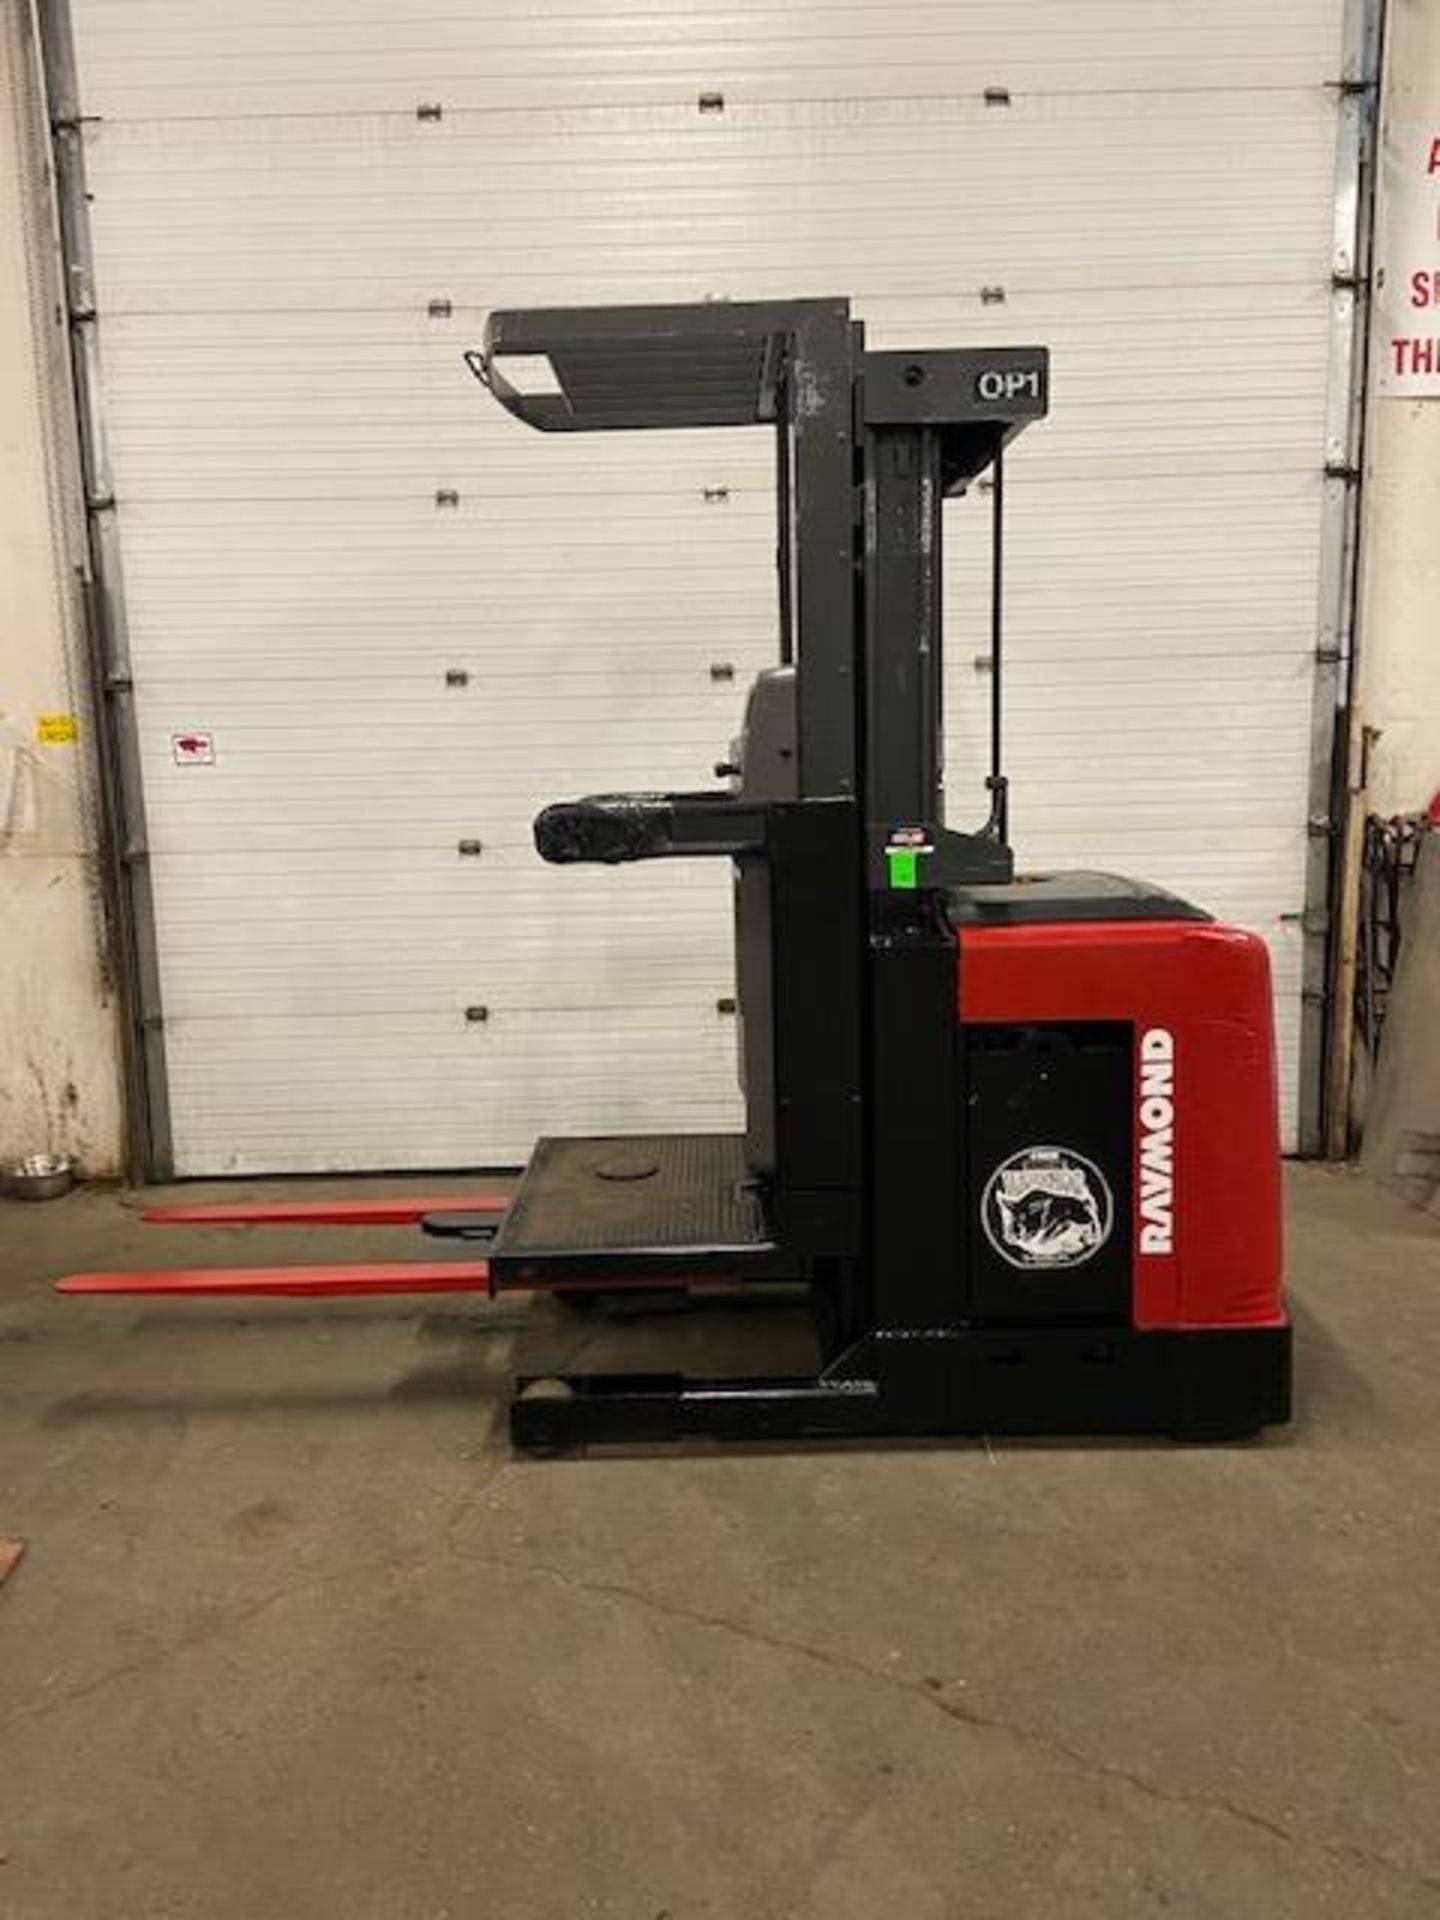 FREE CUSTOMS - 2007 Raymond Order Picker Electric 3-stage Mast Powered Pallet Cart Lifter with LOW